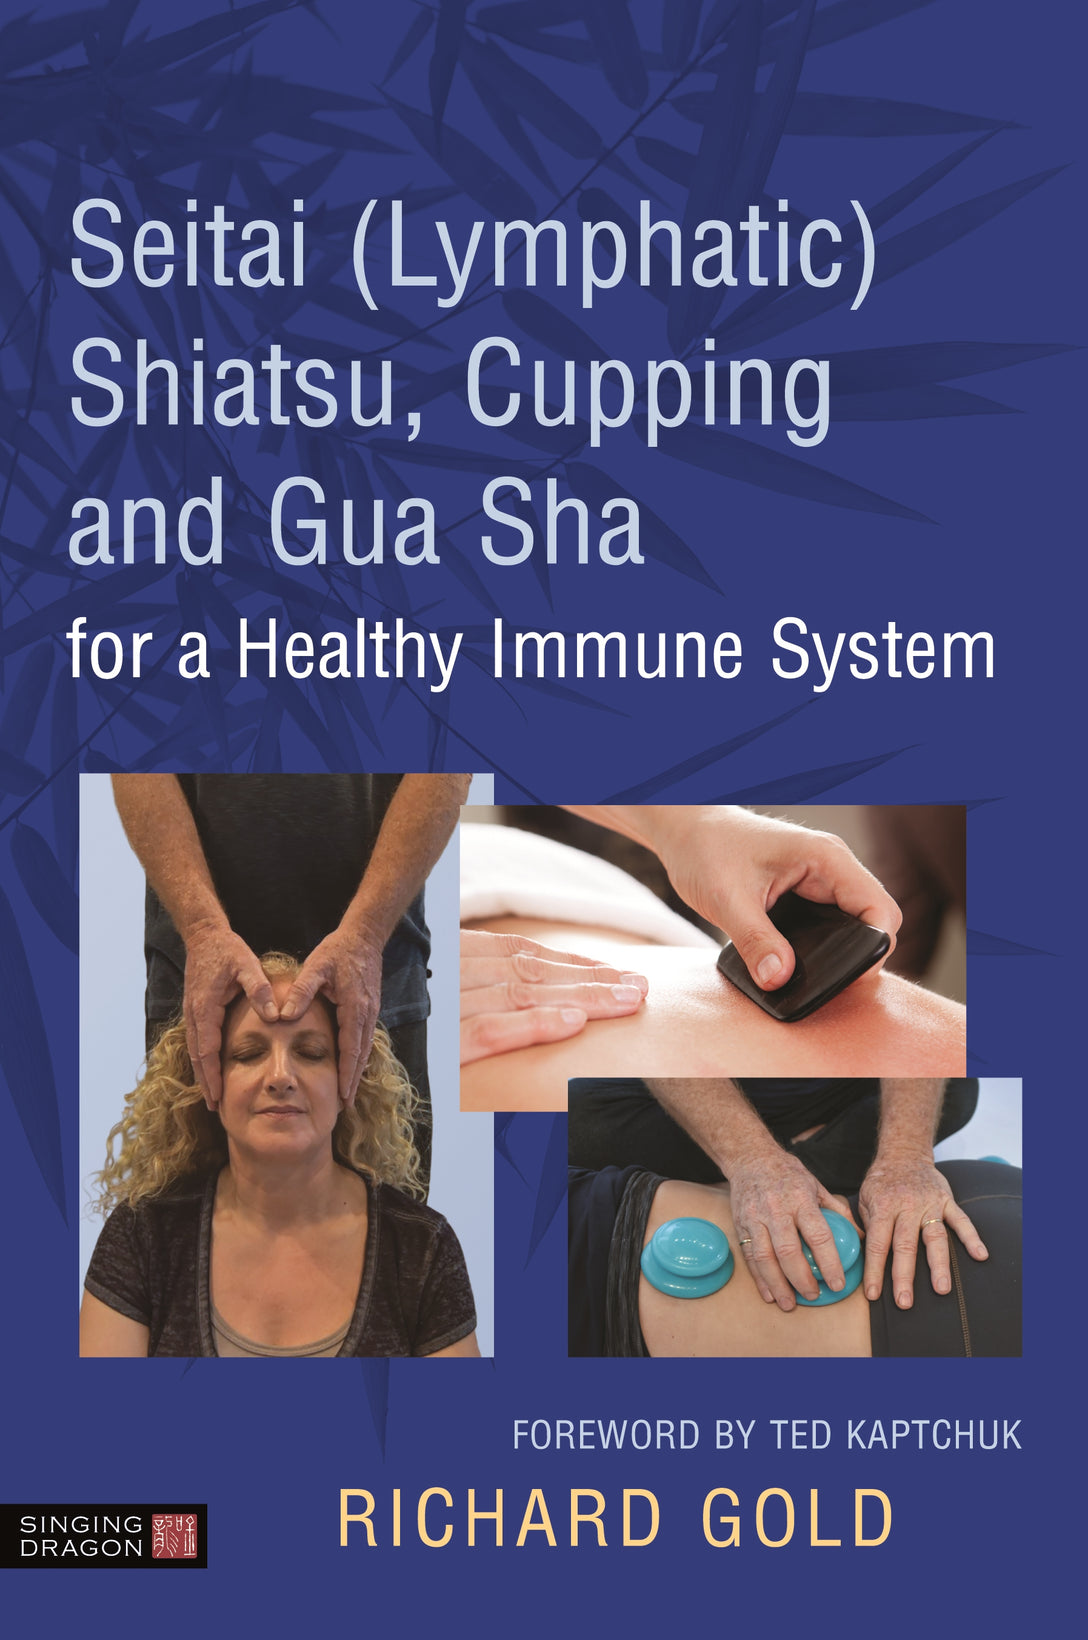 Seitai (Lymphatic) Shiatsu, Cupping and Gua Sha for a Healthy Immune System by Ted Kaptchuk, Kenneth Goff, Dr. Richard Gold